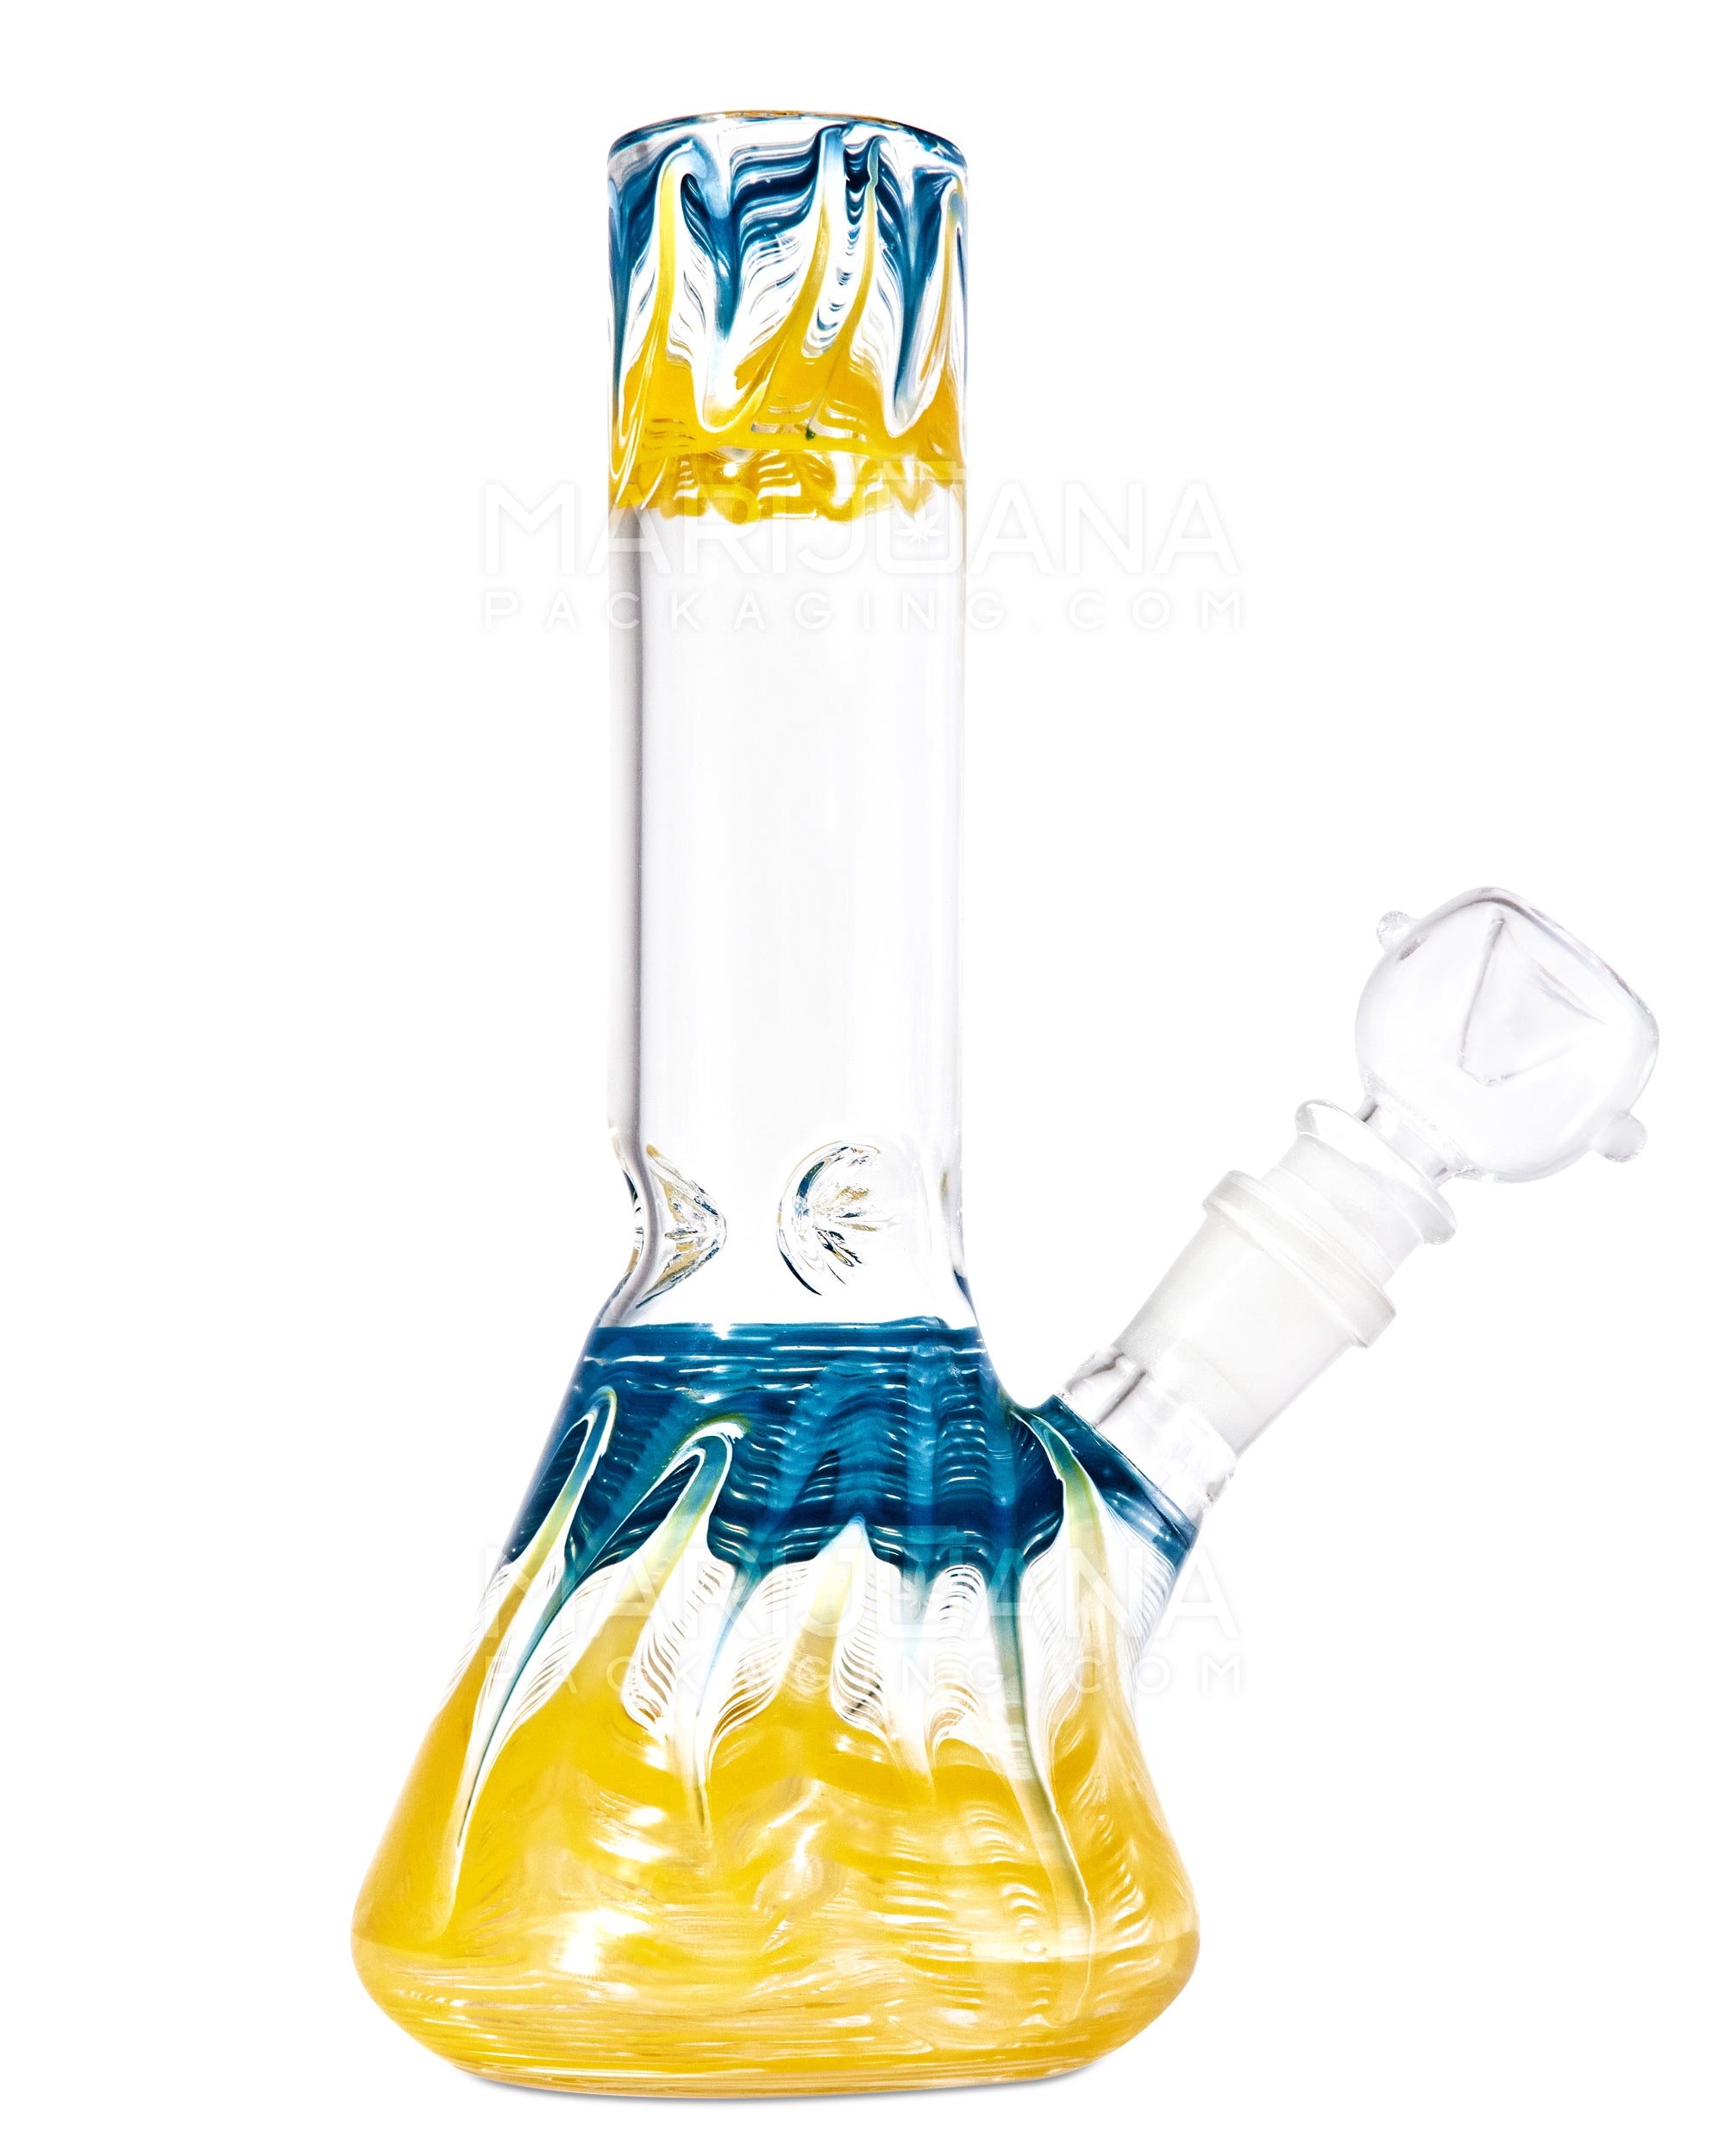 Straight Neck Raked Thick Glass Beaker Water Pipe w/ Ice Catcher | 8in Tall - 14mm Bowl - Assorted - 5